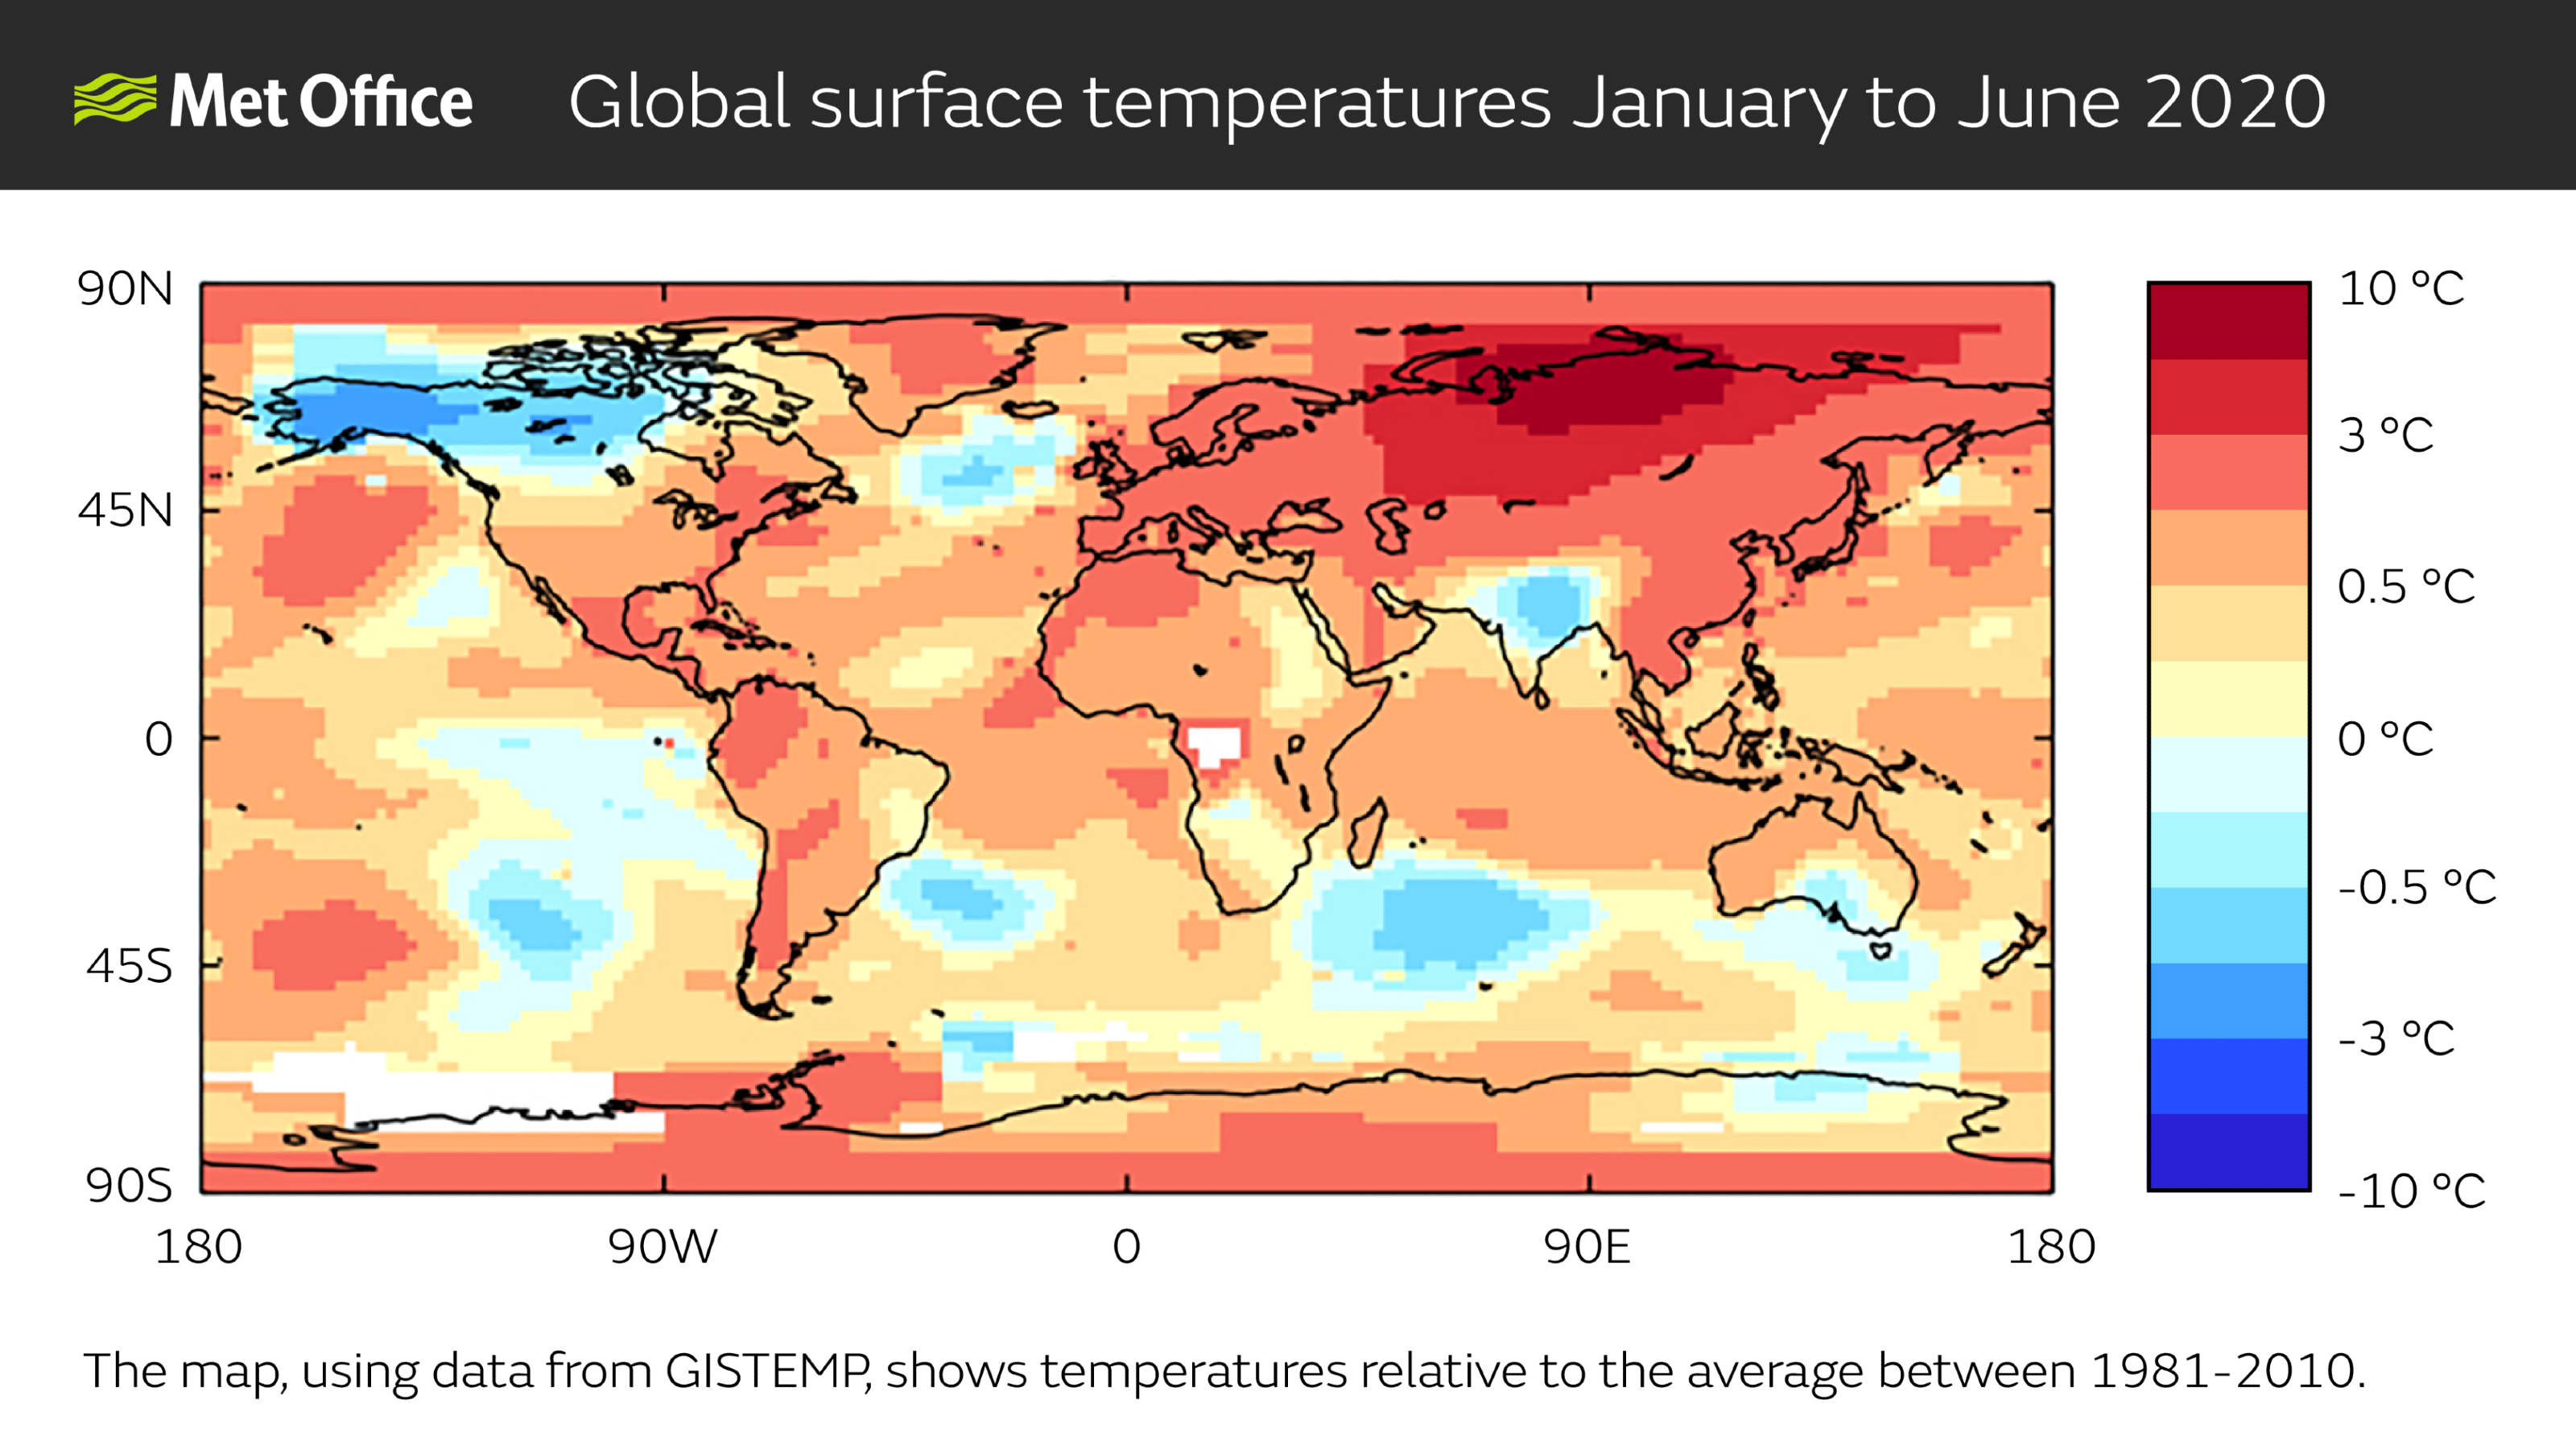 Map showing global surface temperatures from January to June 2020, relative to the average between 1981-2010. Most of Siberia sees an increase of between 3 and 10 °C, compared to the 1981-2010 average.